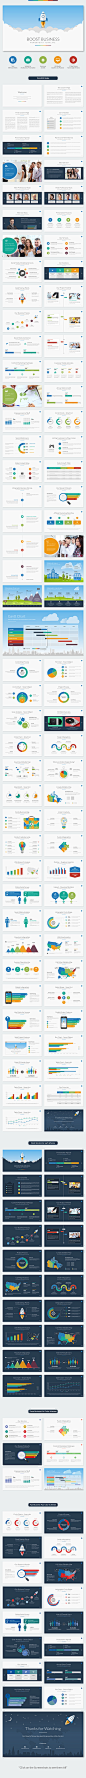 Boost Business Powerpoint Template - Business PowerPoint Templates